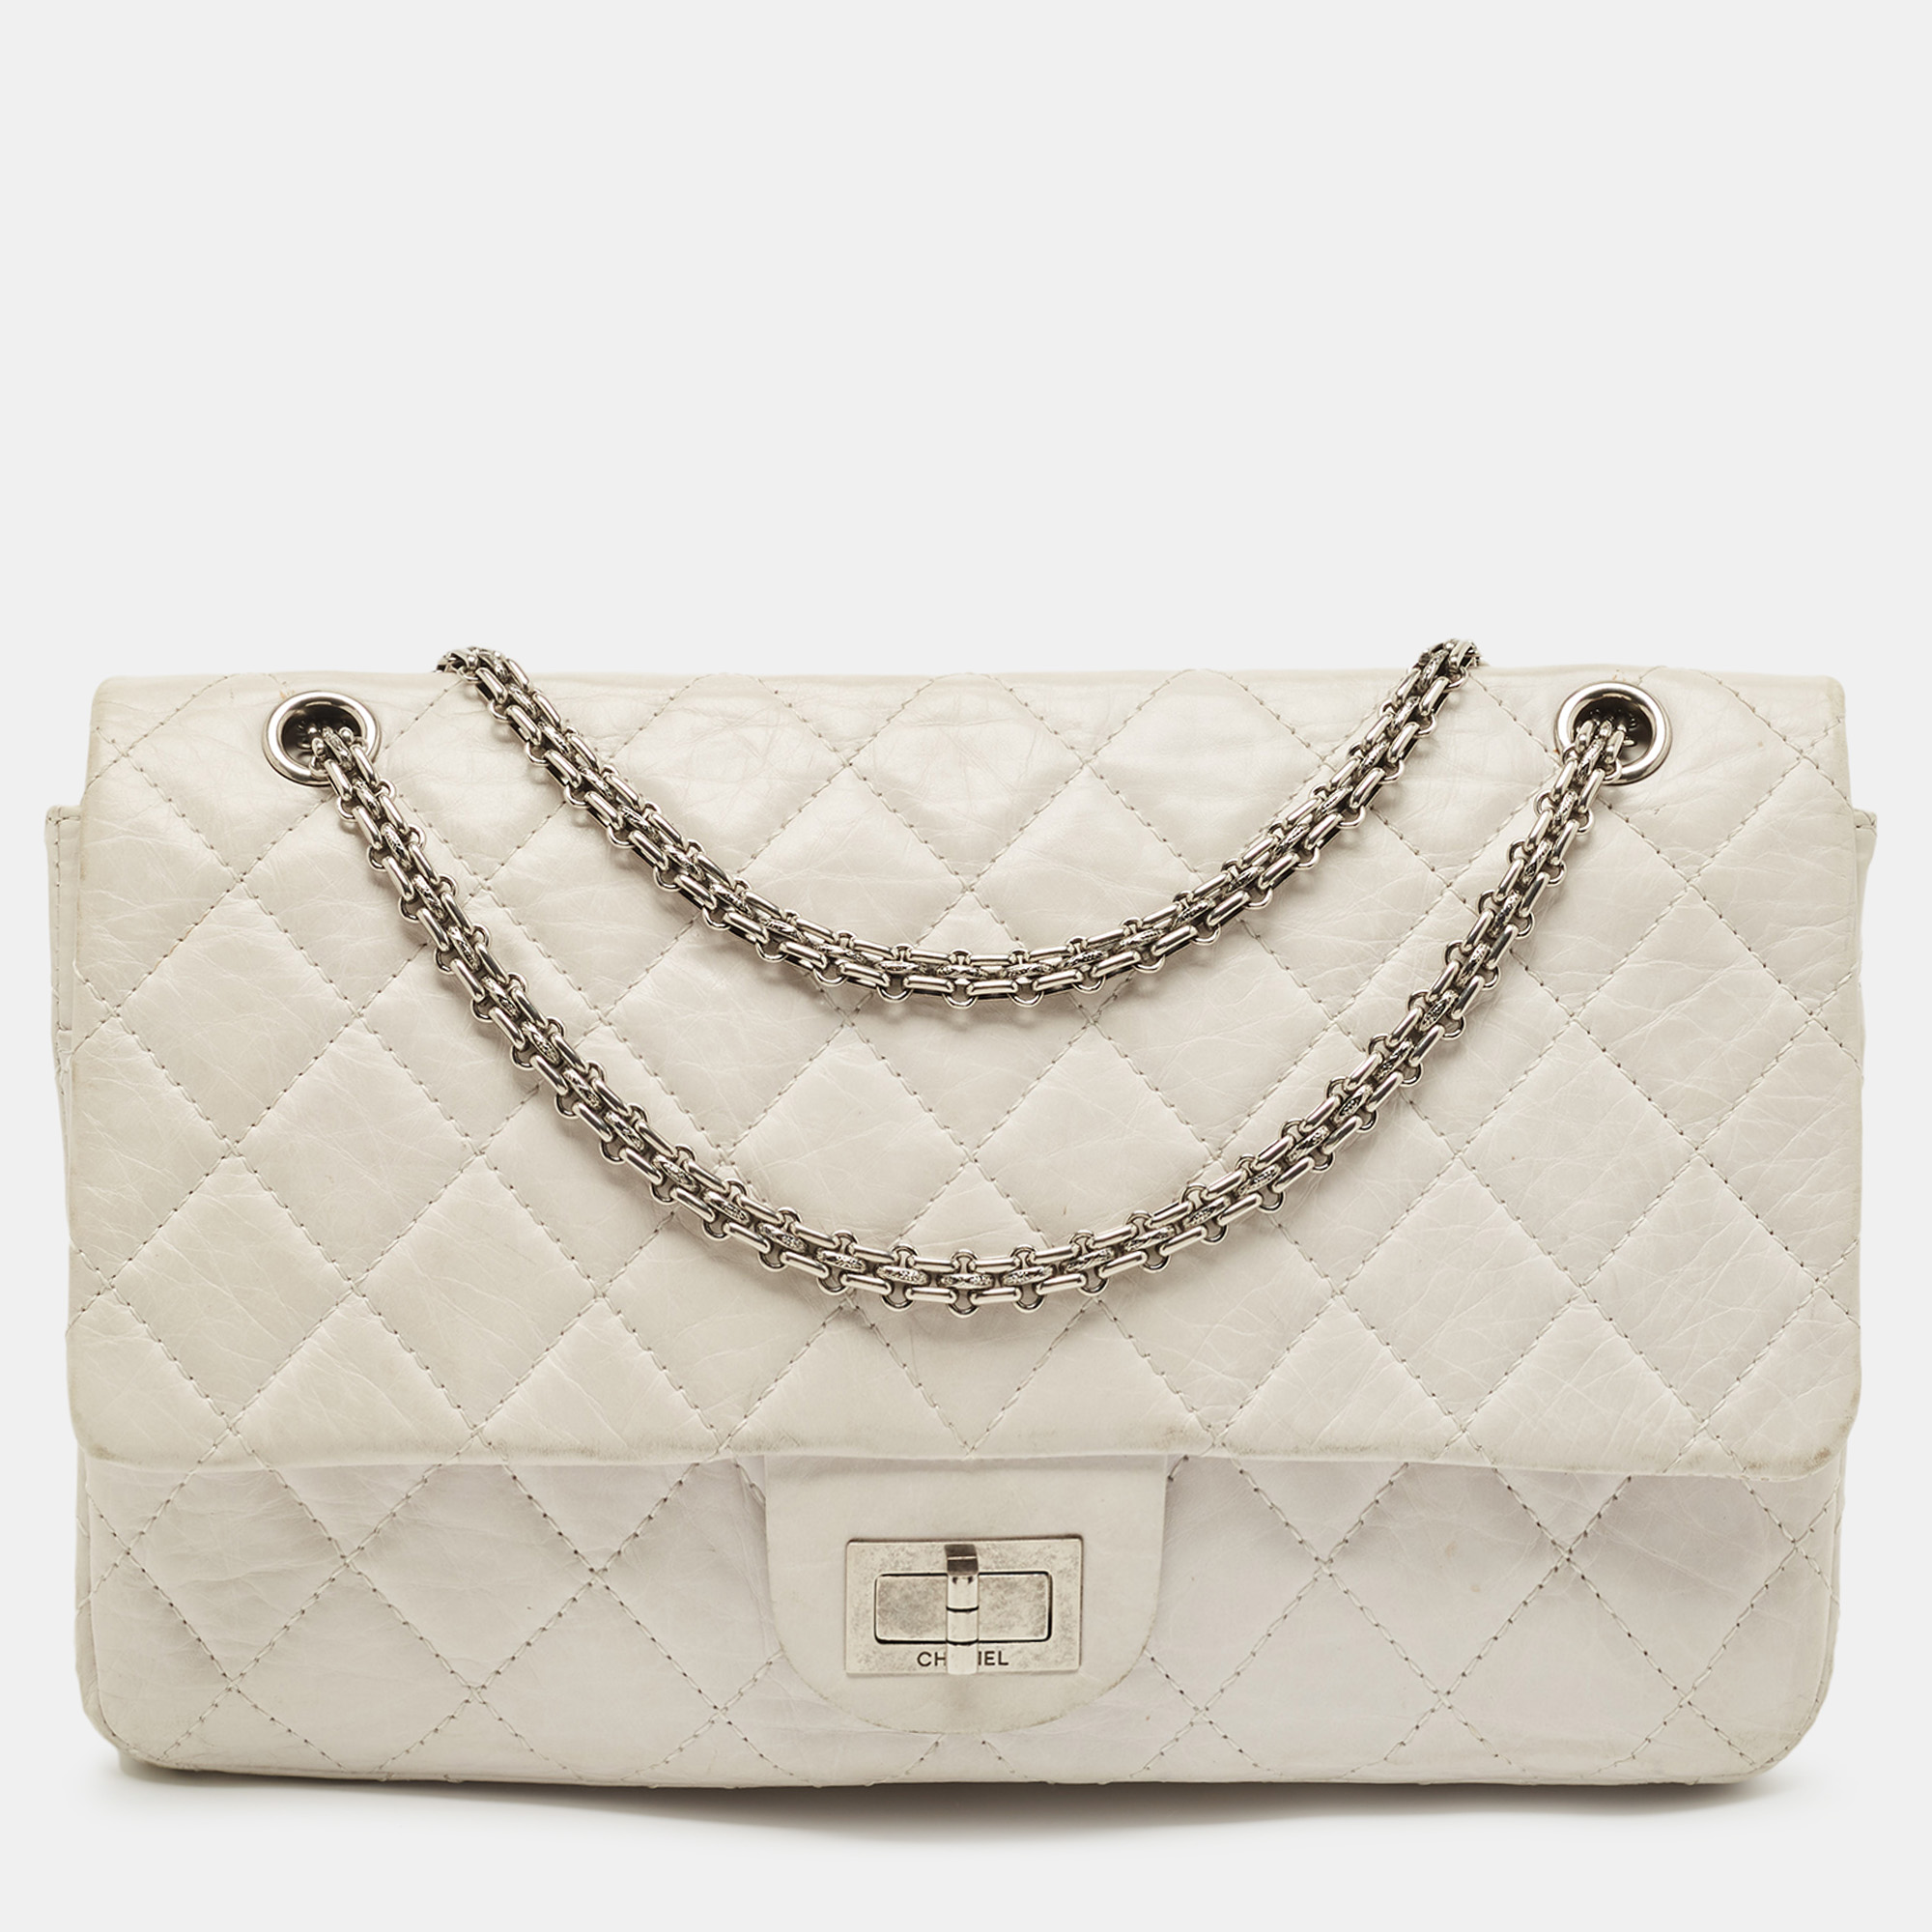 Pre-owned Chanel White Quilted Aged Leather Reissue 2.55 Classic 227 Flap Bag